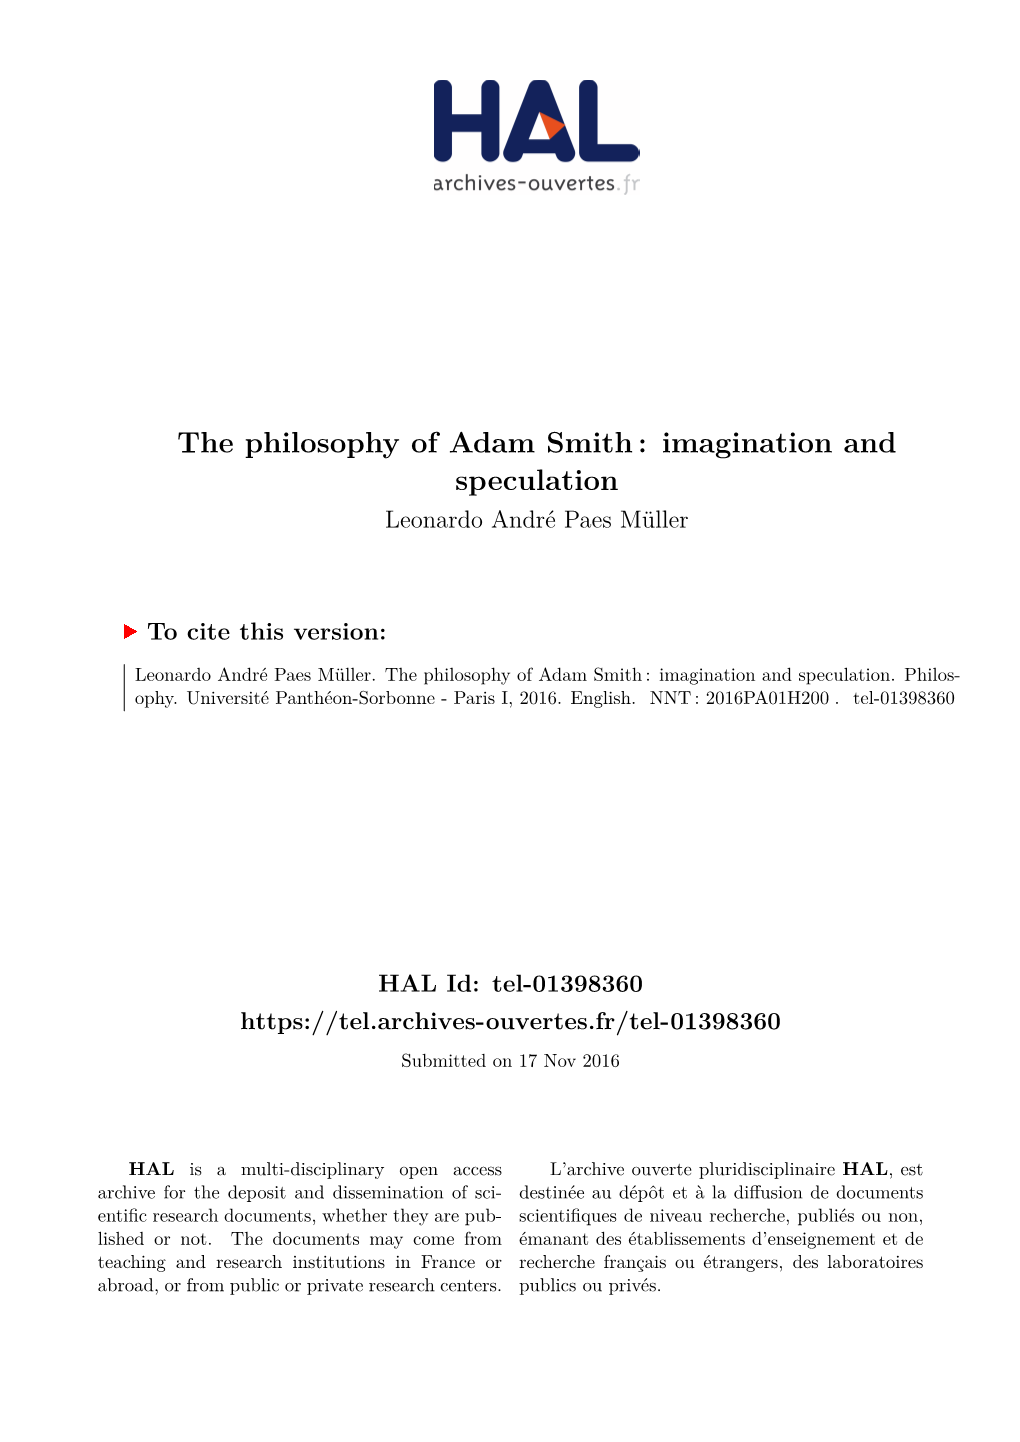 The Philosophy of Adam Smith: Imagination and Speculation